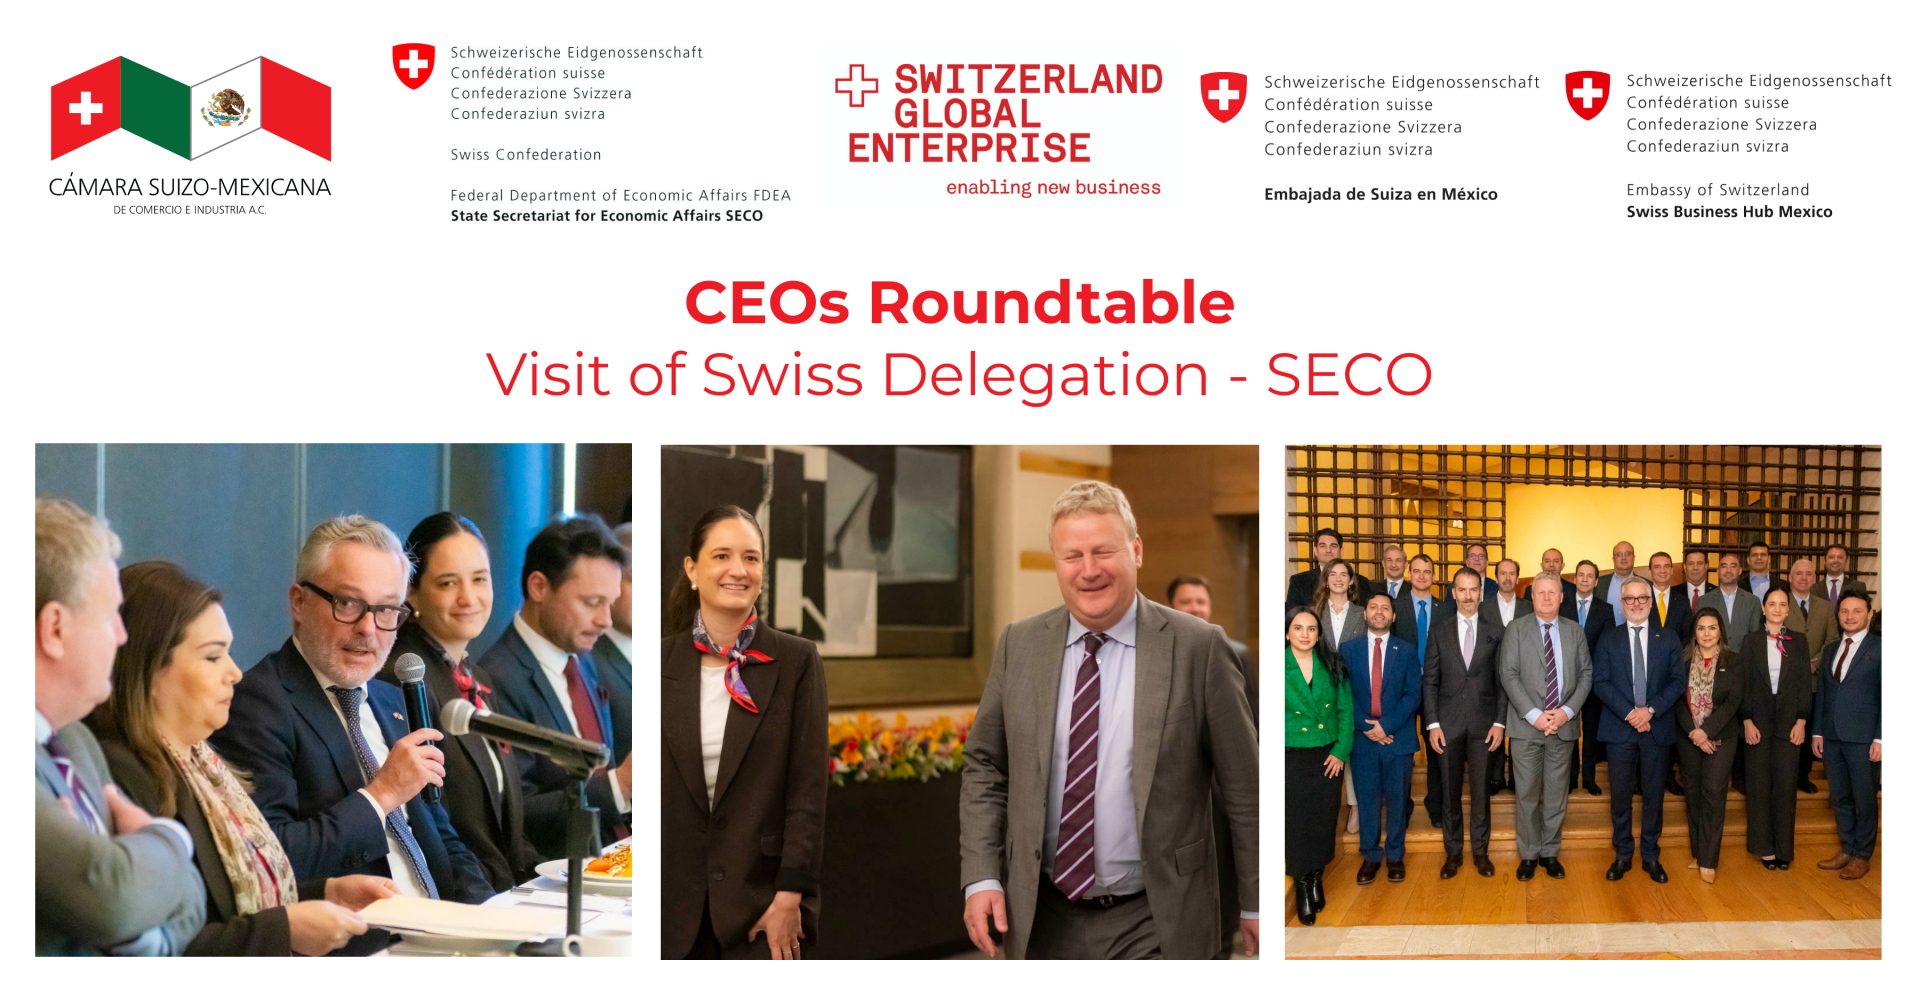 CEOs Roundtable – Visit of Swiss Delegation SECO